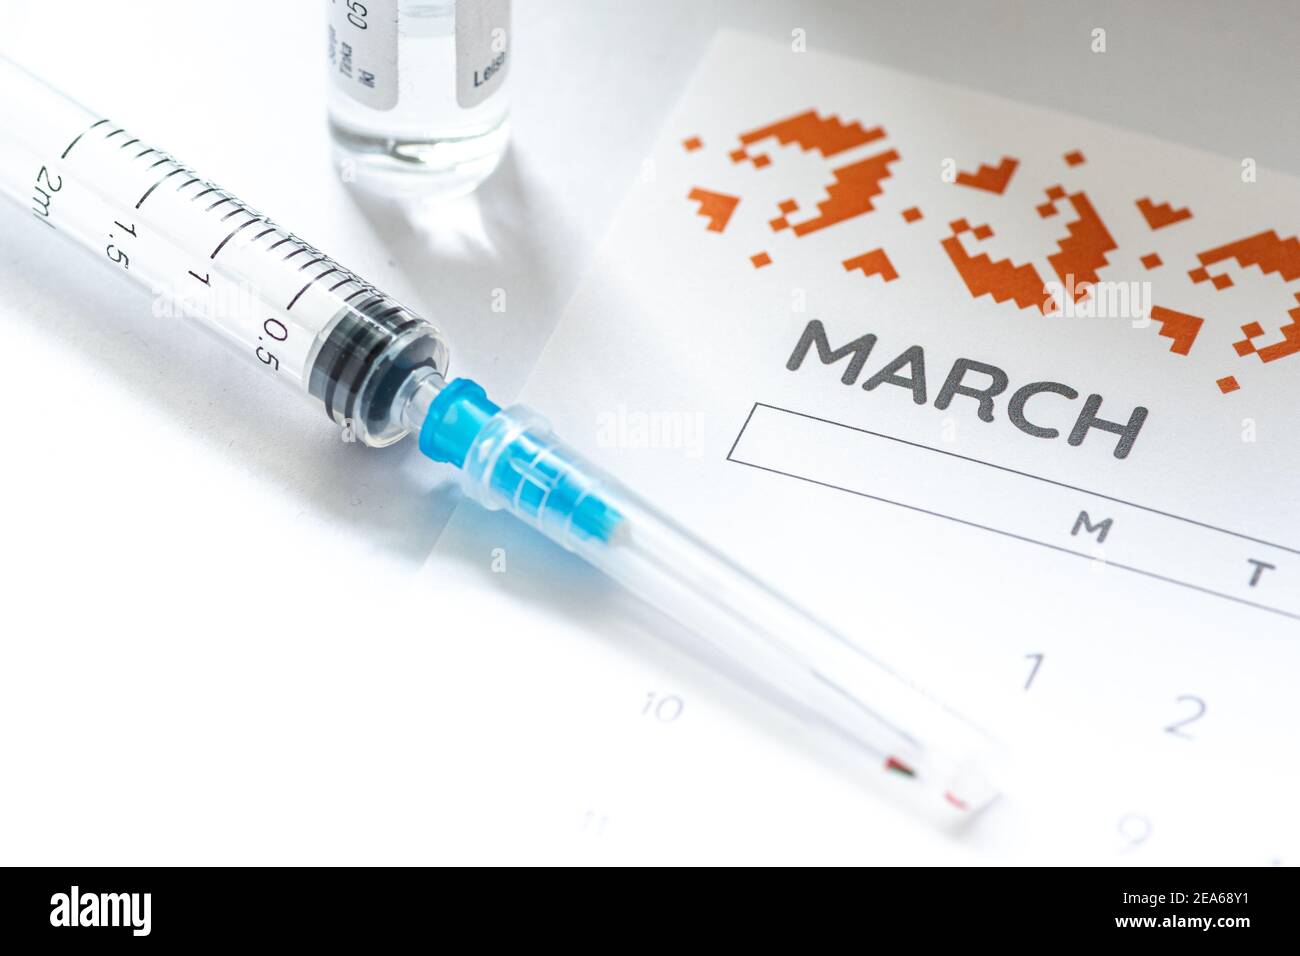 Syringe, glass vial or phial and calendar with month of March on a white table ready to be used. Covid or Coronavirus vaccine background, close up Stock Photo